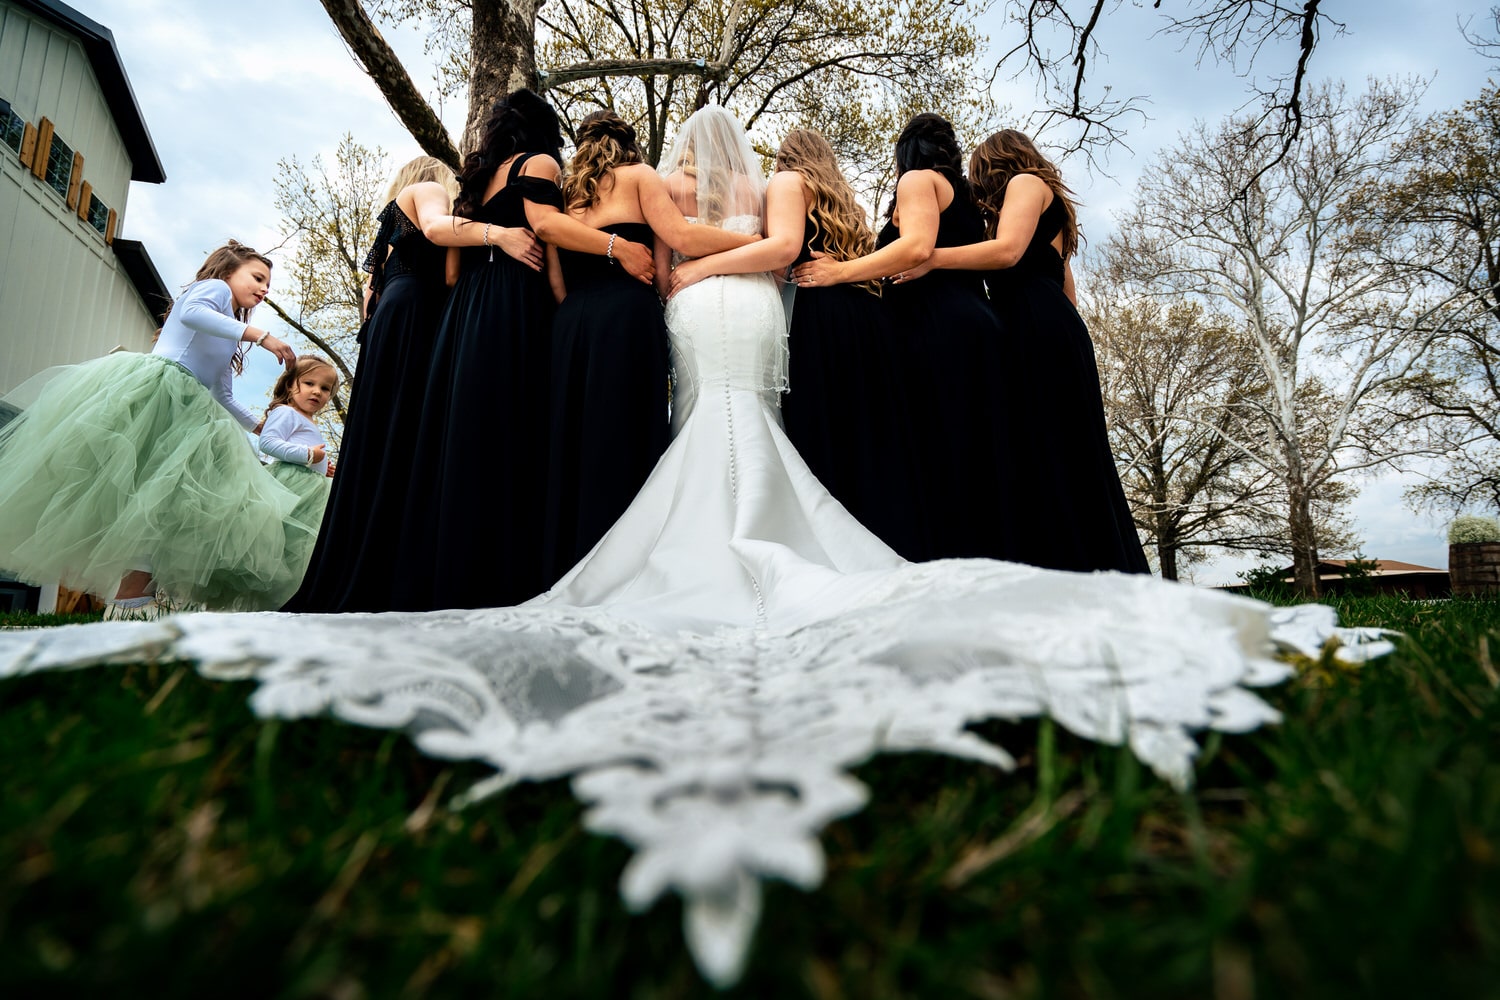 A picture taken from the ground looking up of a bride's wedding gown train. 